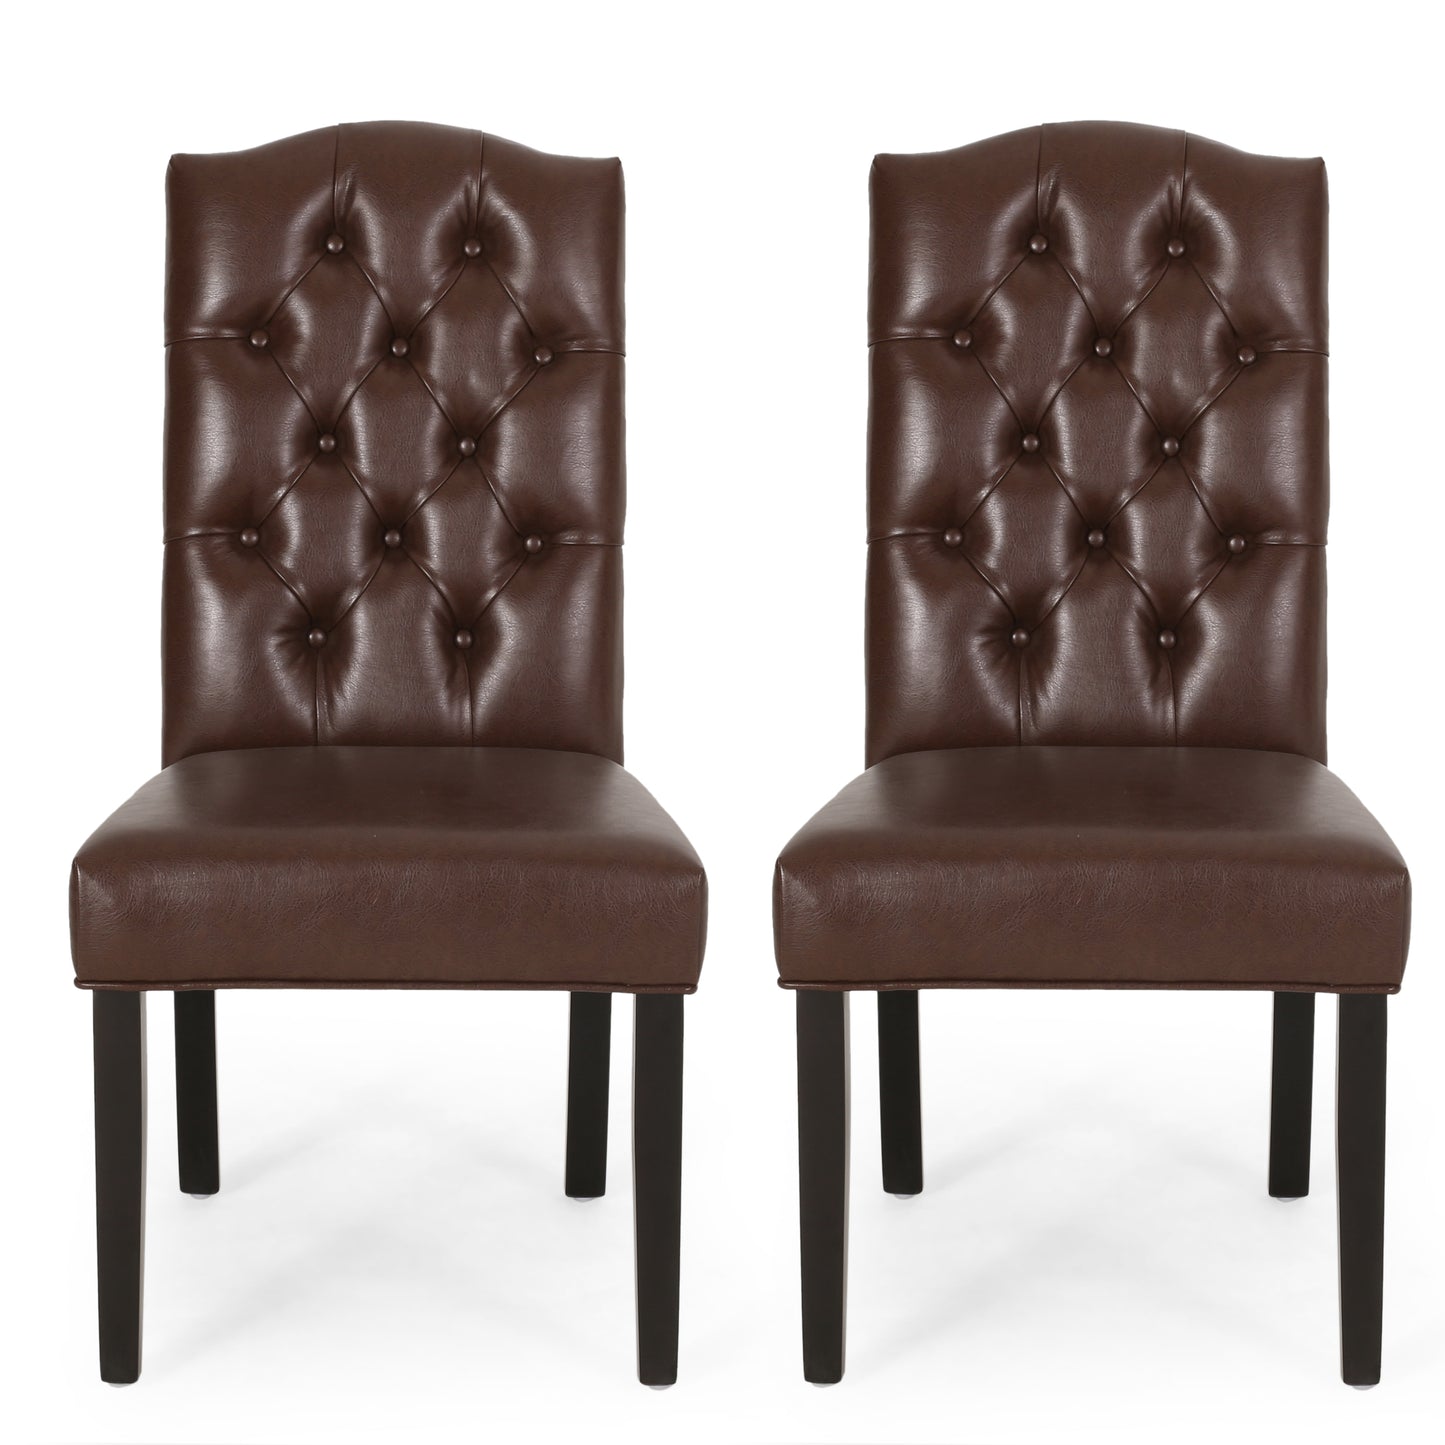 Winfough Contemporary Tufted Dining Chairs, Set of 2